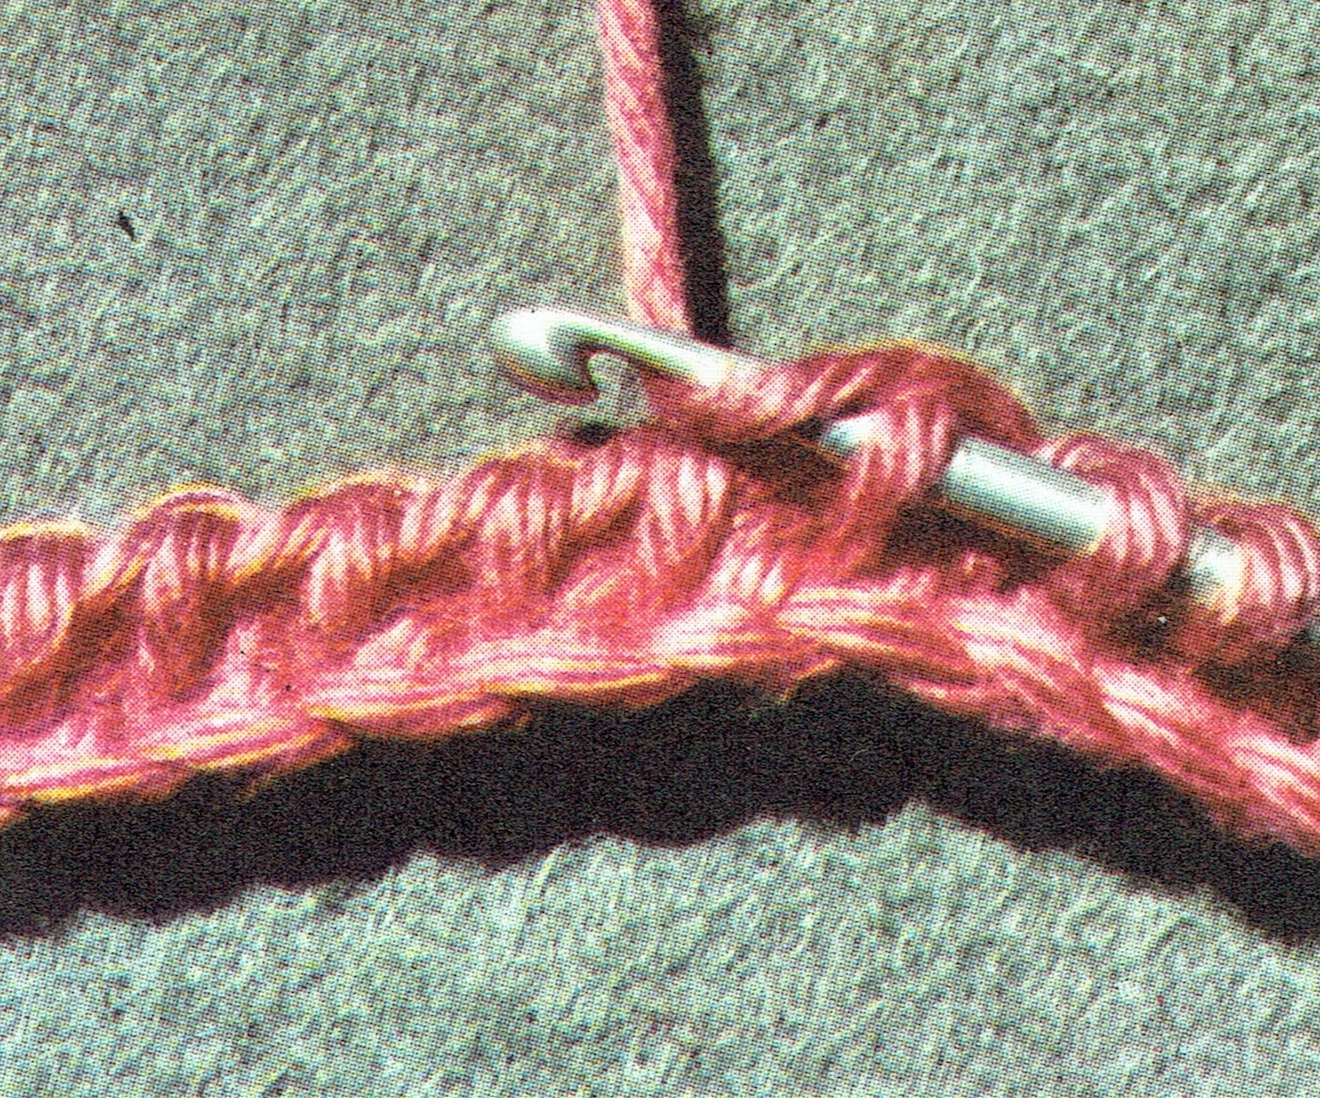 Working the third row, inserting the hook into the upright thread of the previous row.